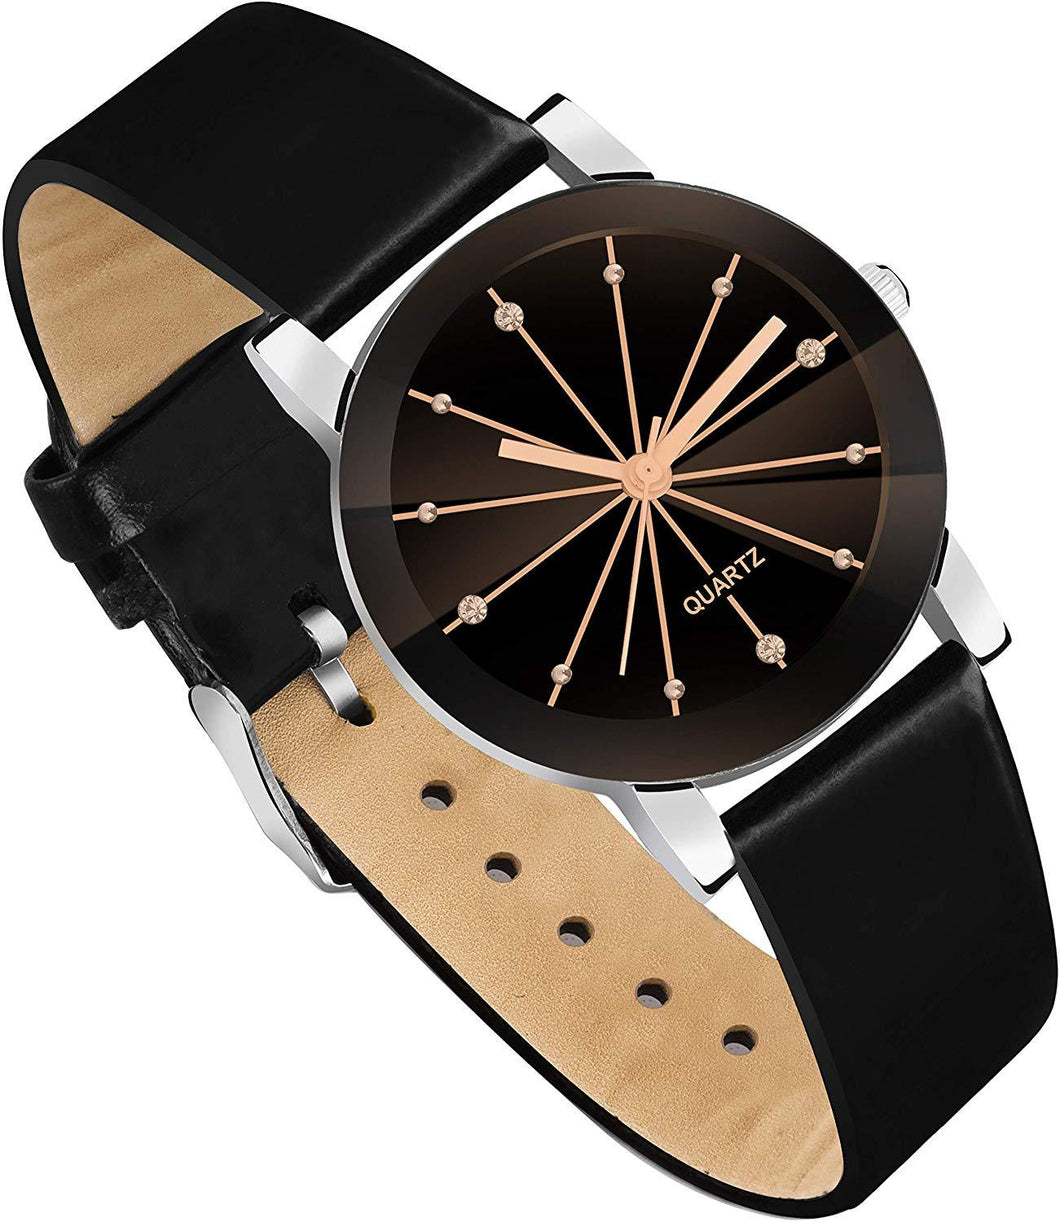 Trending Style Best Quality Prism Glass Design for Women and Girls Analog Watch